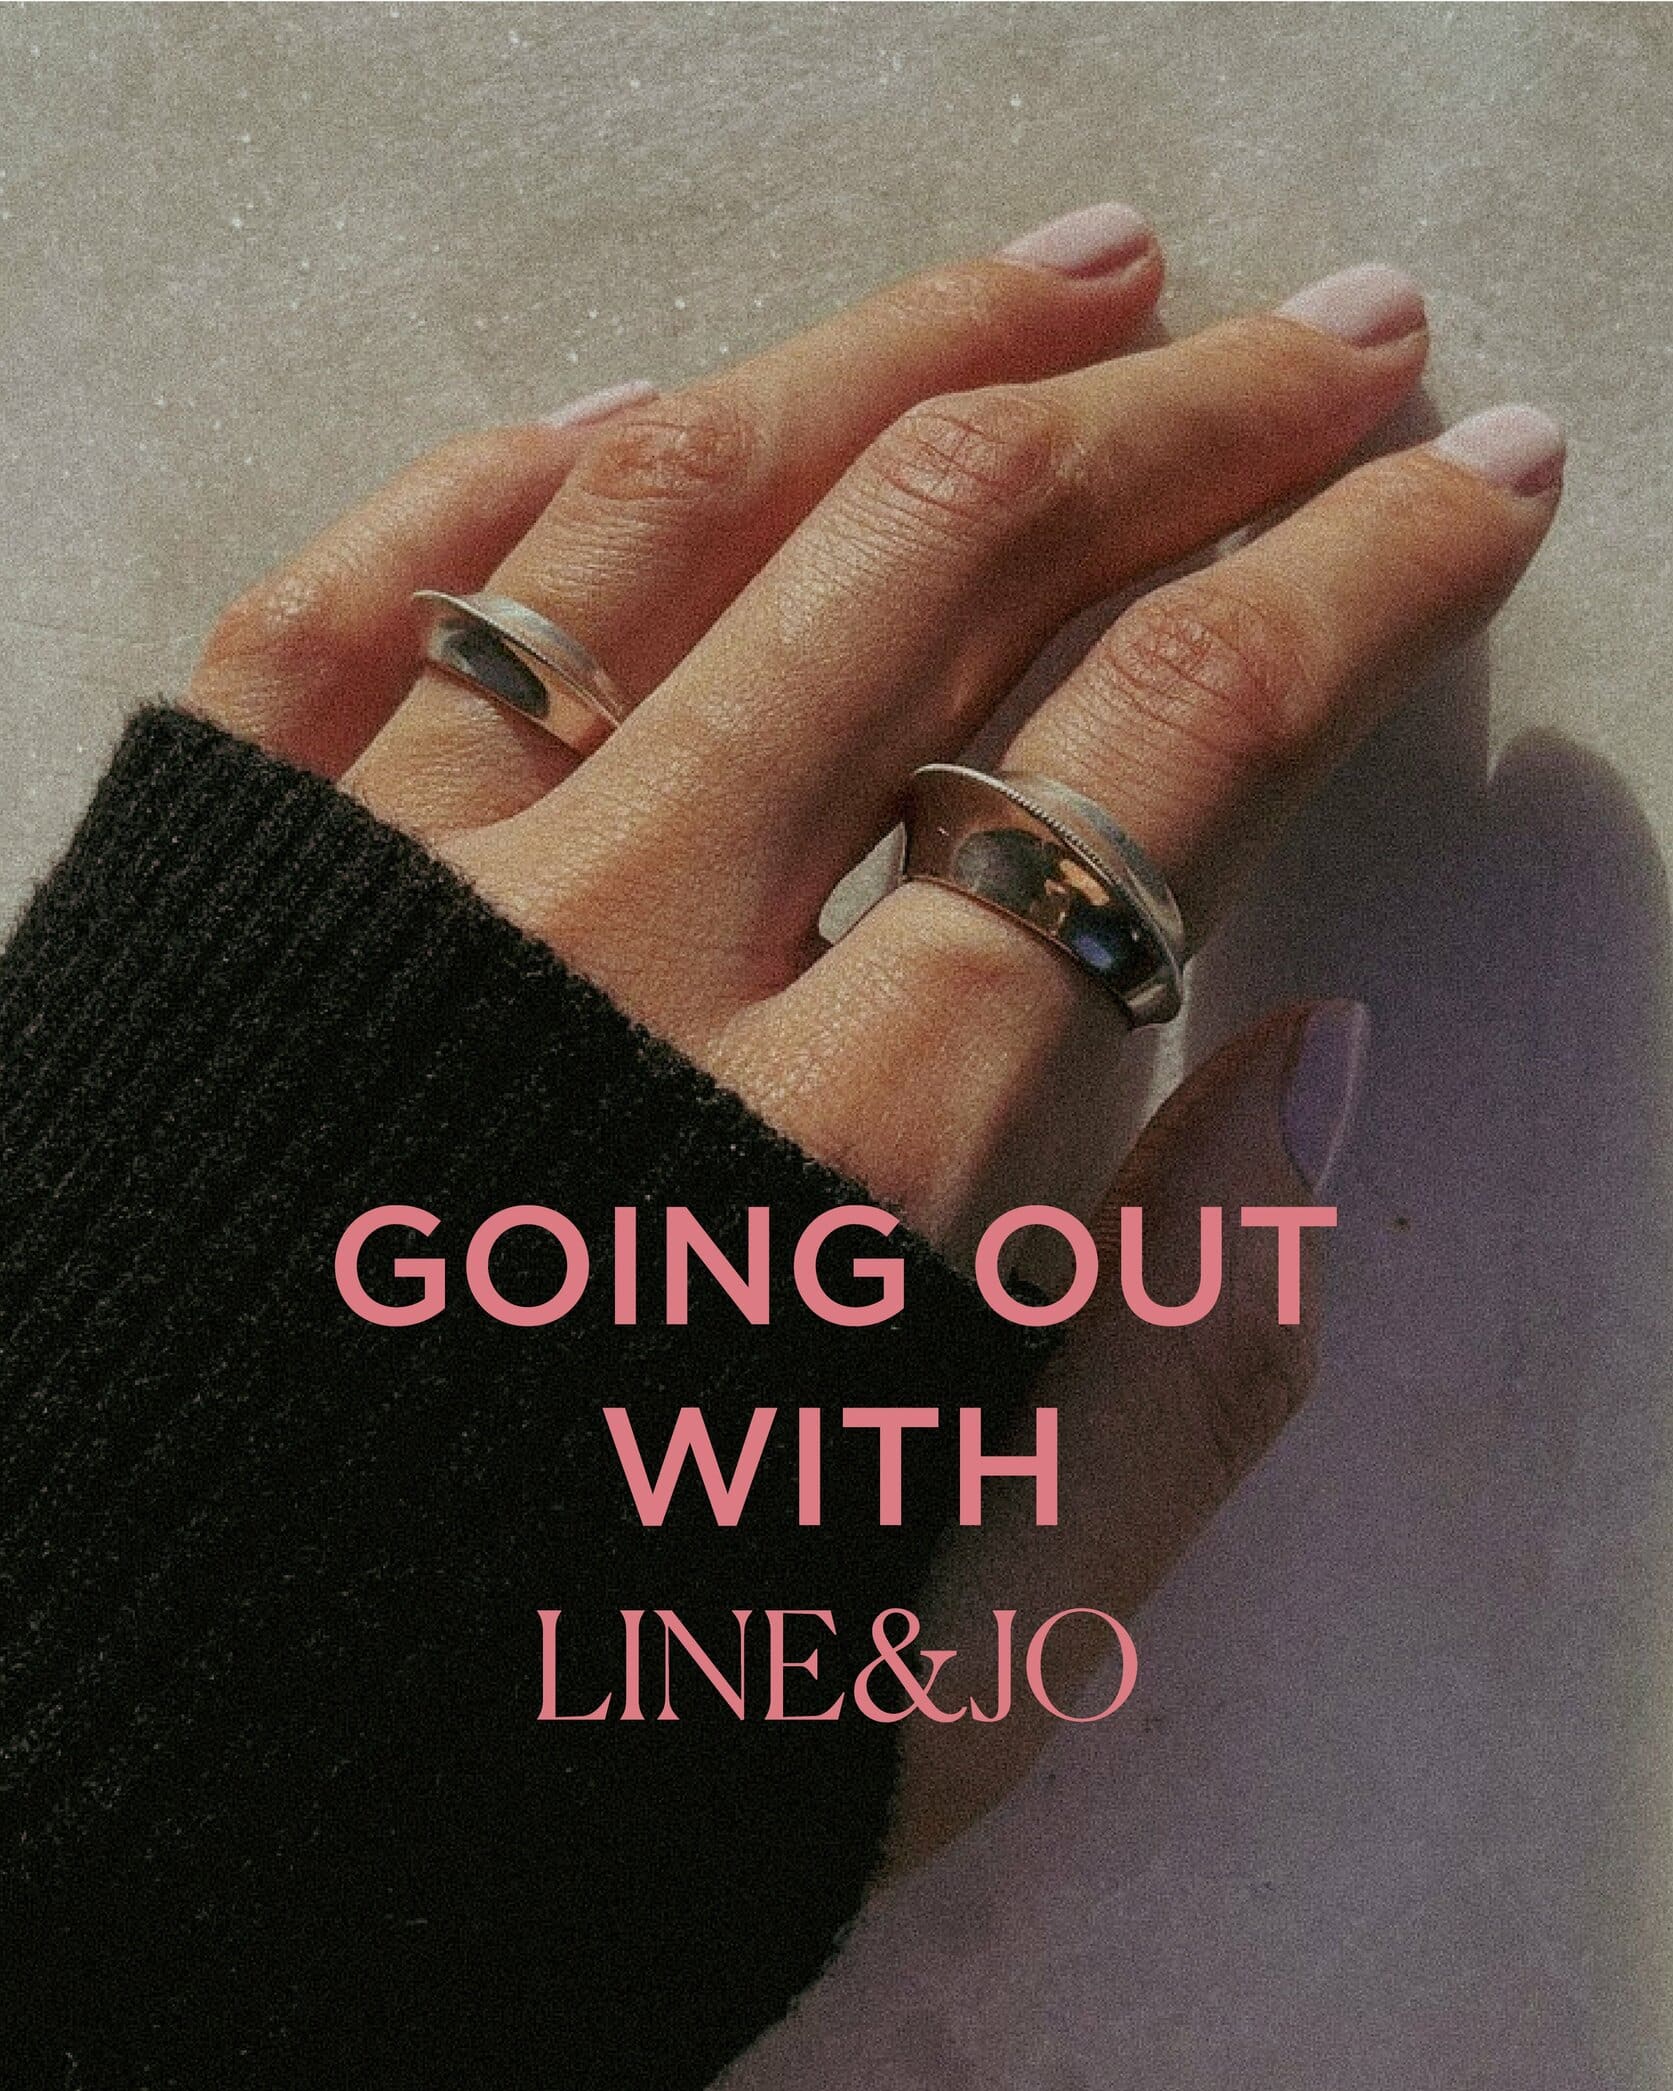 Going out with LINE&JO: Laura Lind